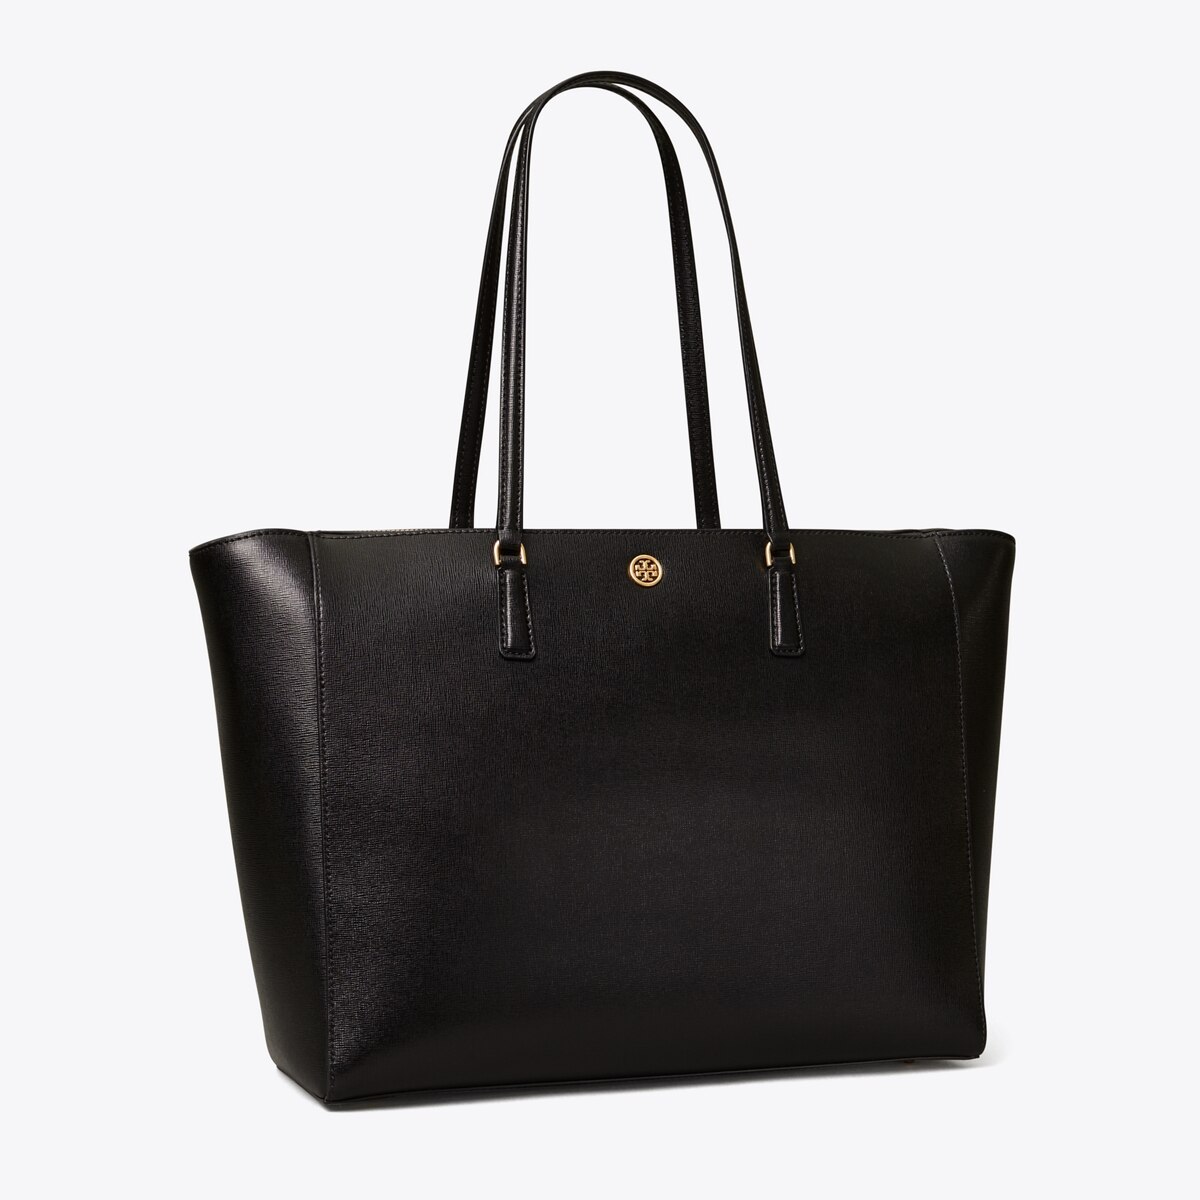 Tory Burch Robinson Tote Brown Leather